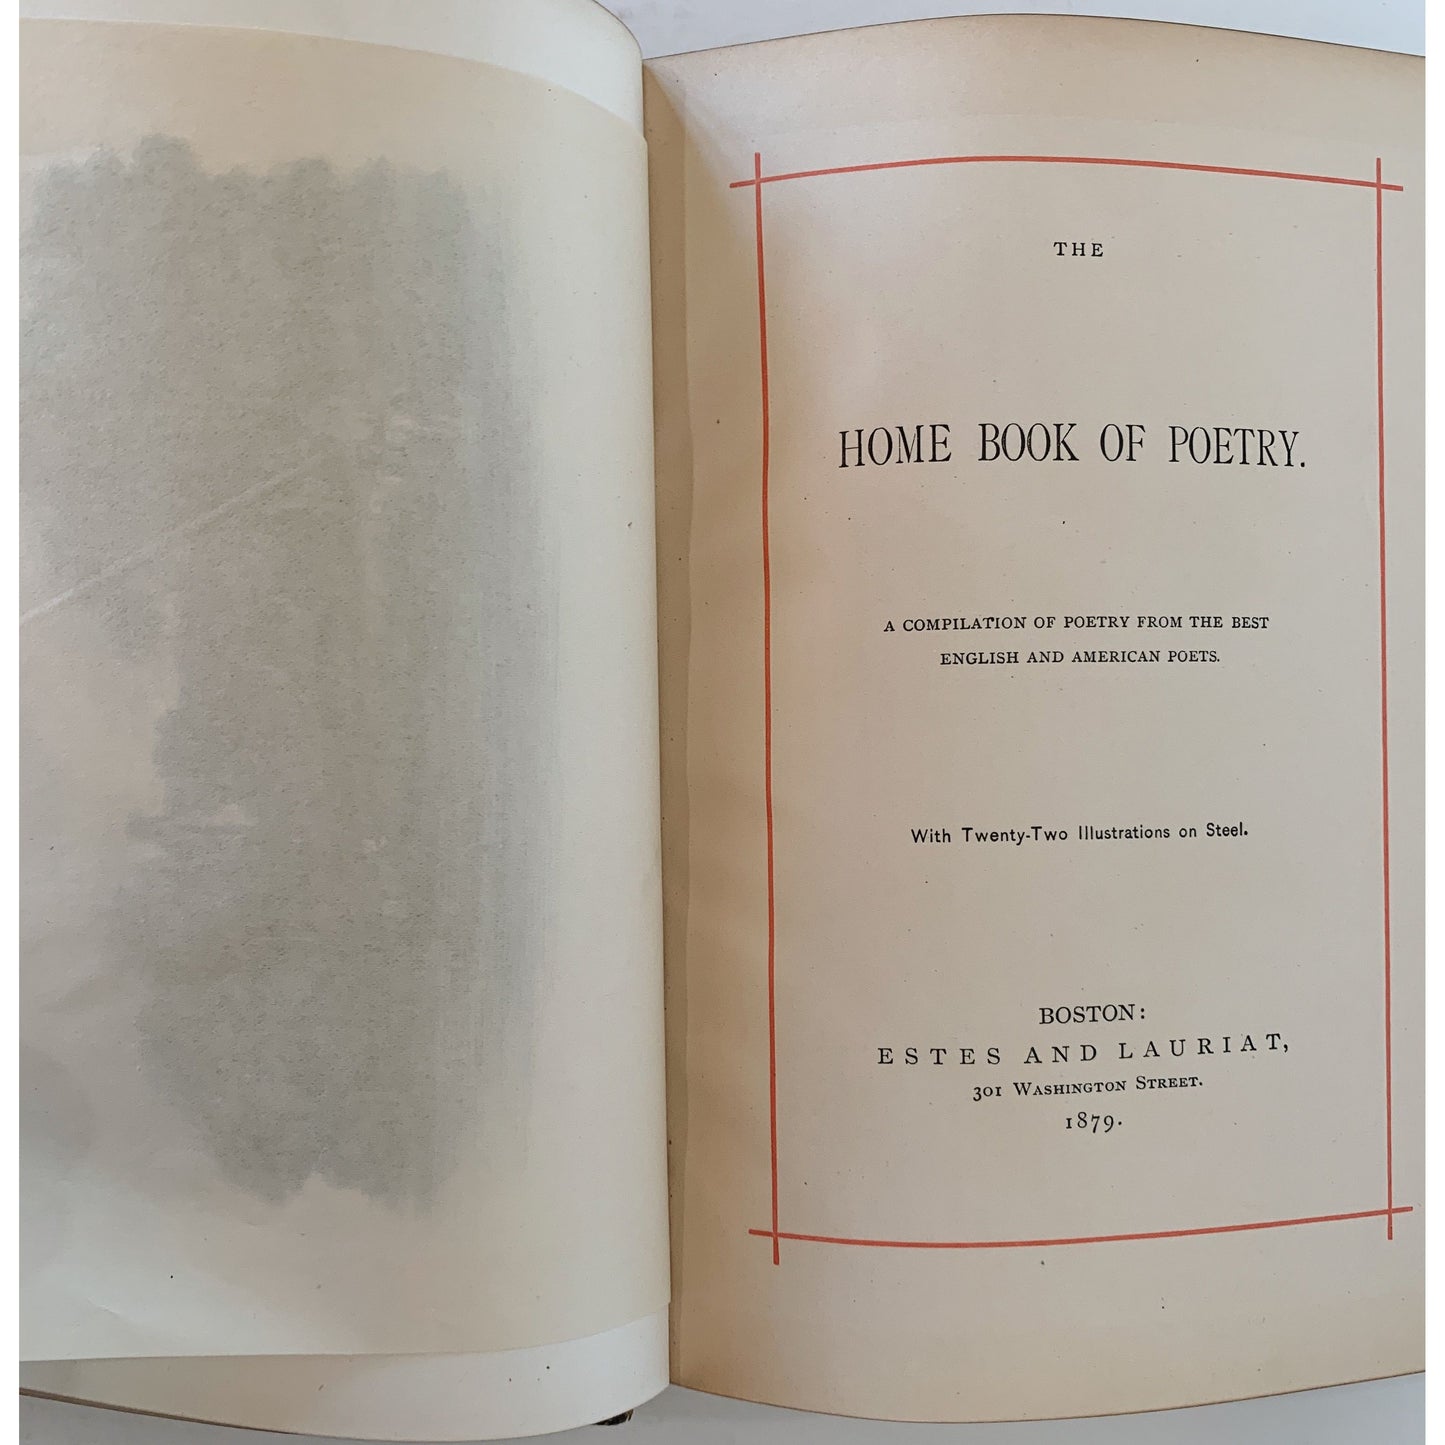 The Home Book of Poetry, English and American Poets, 1879